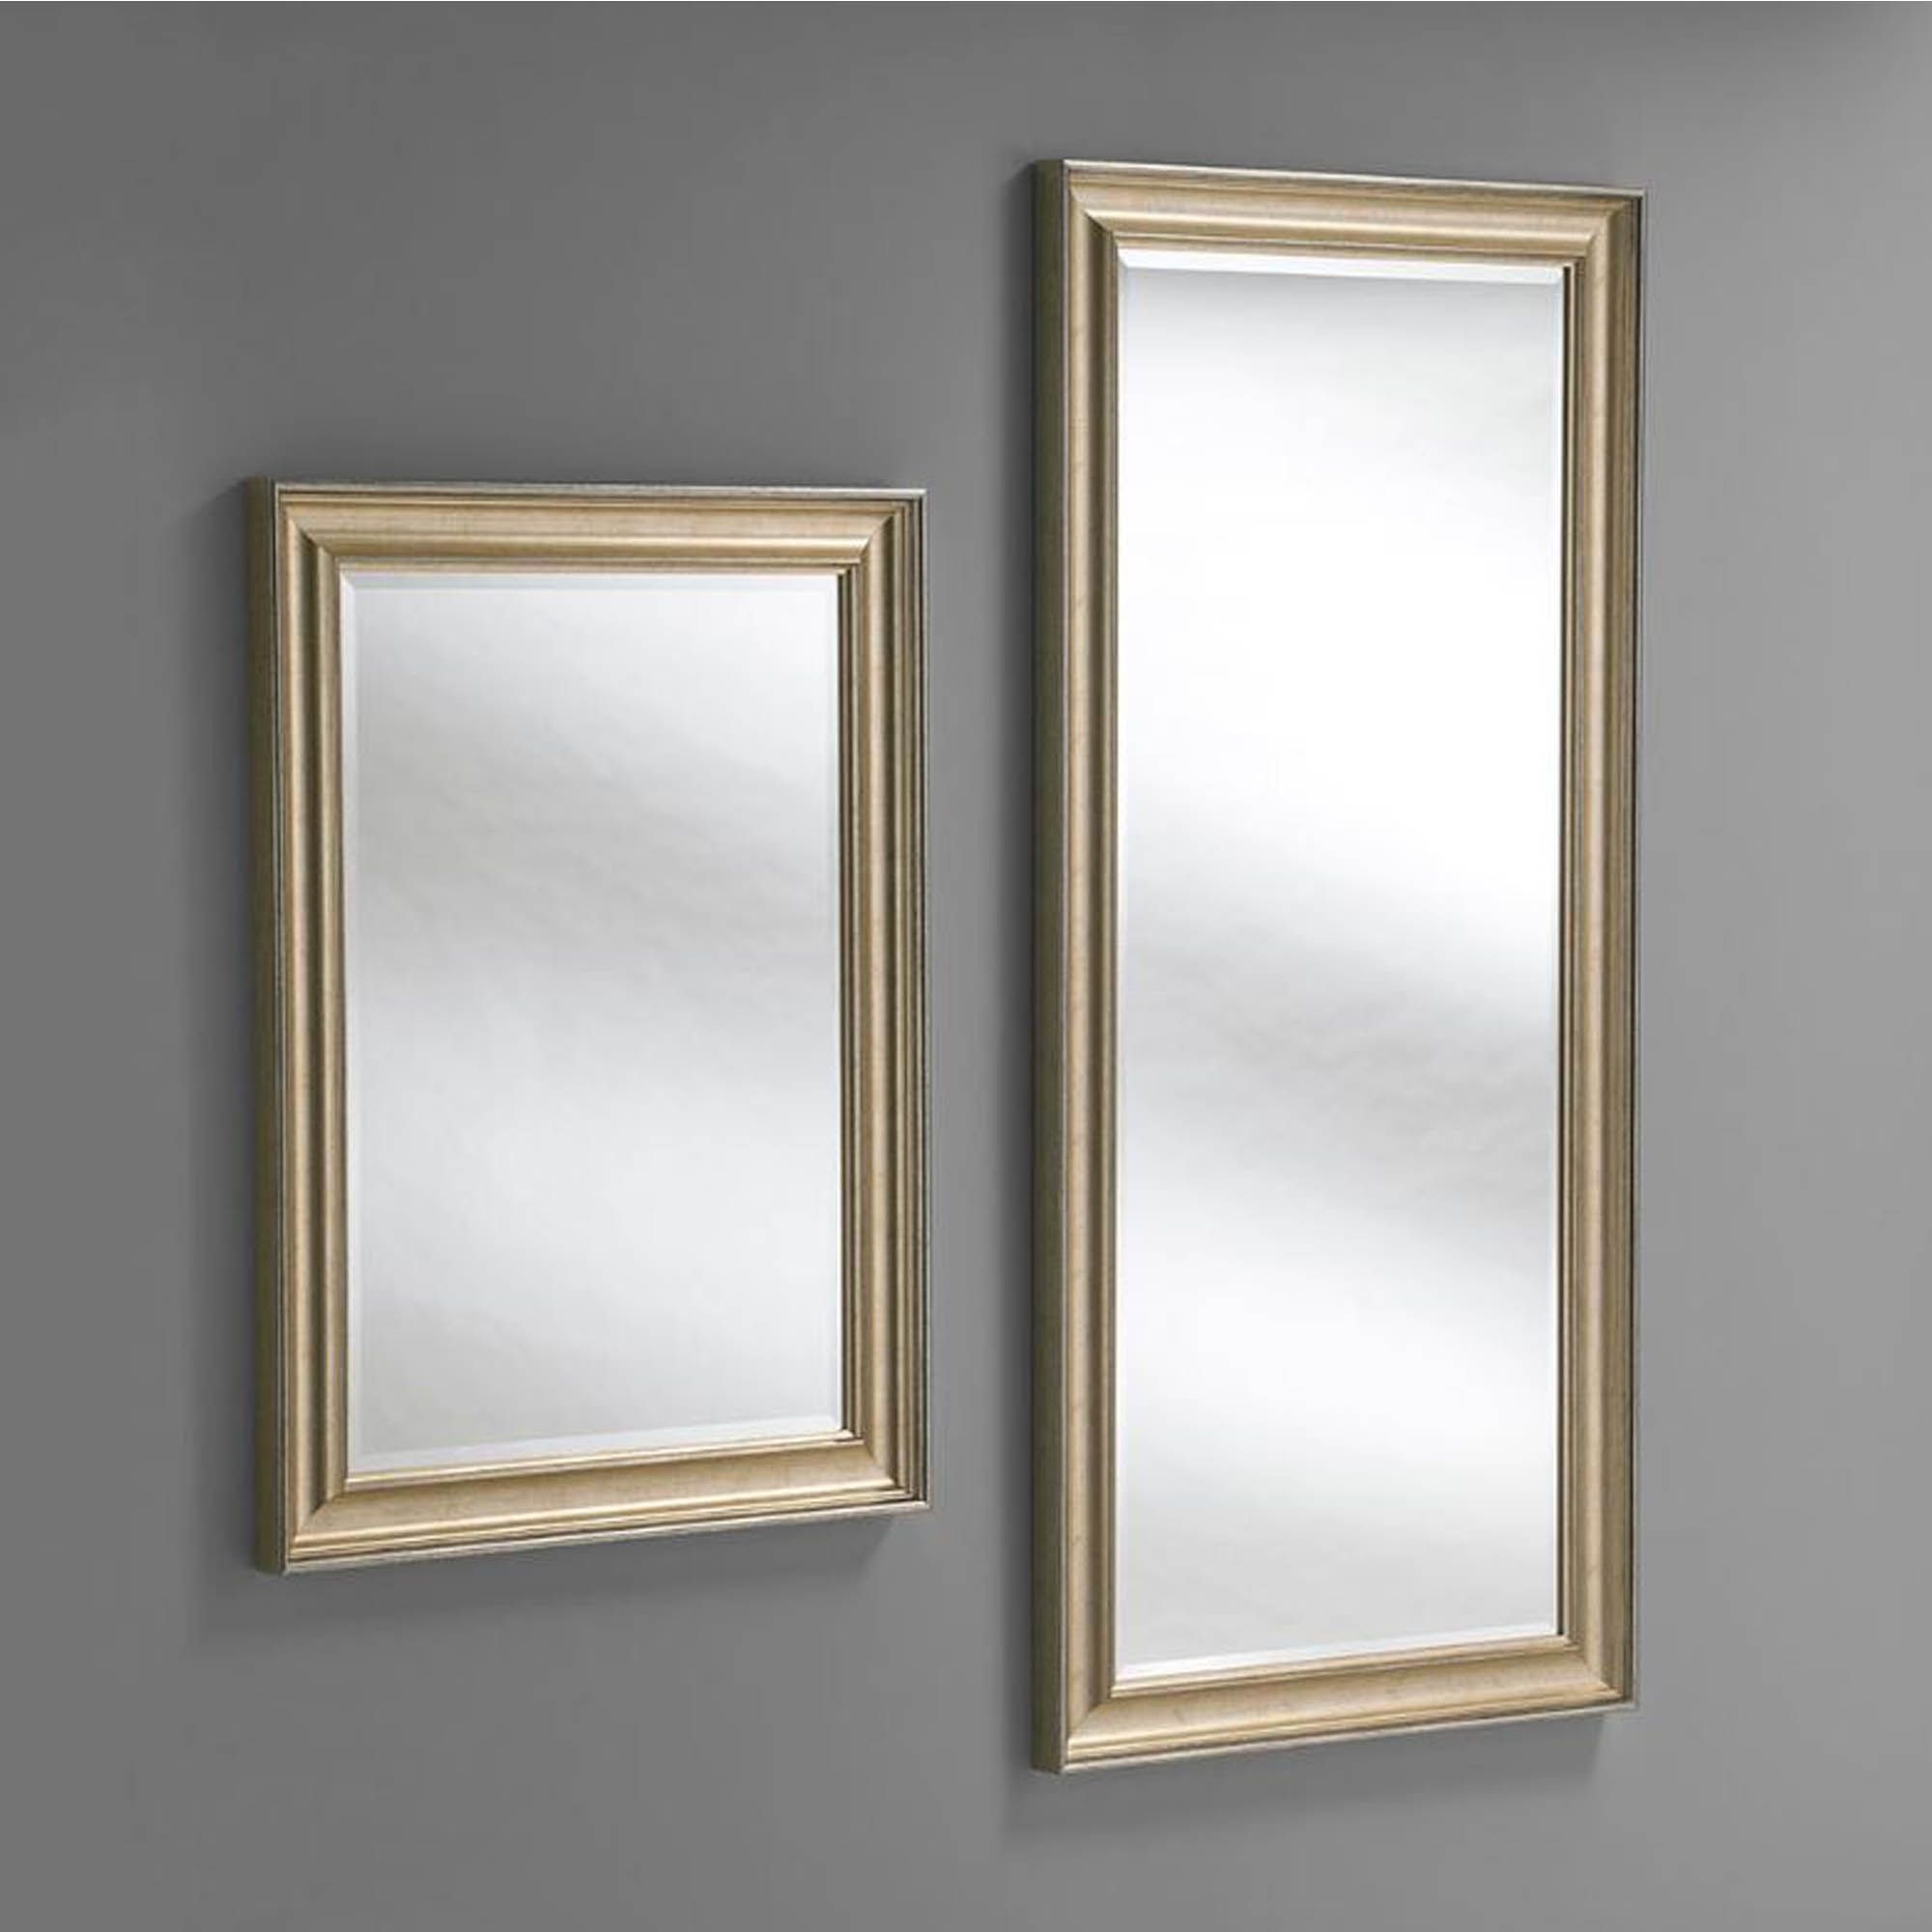 Rectangular Champagne Beveled Wall Mirror | Homesdirect365 Within Bevel Edge Rectangular Wall Mirrors (View 6 of 15)